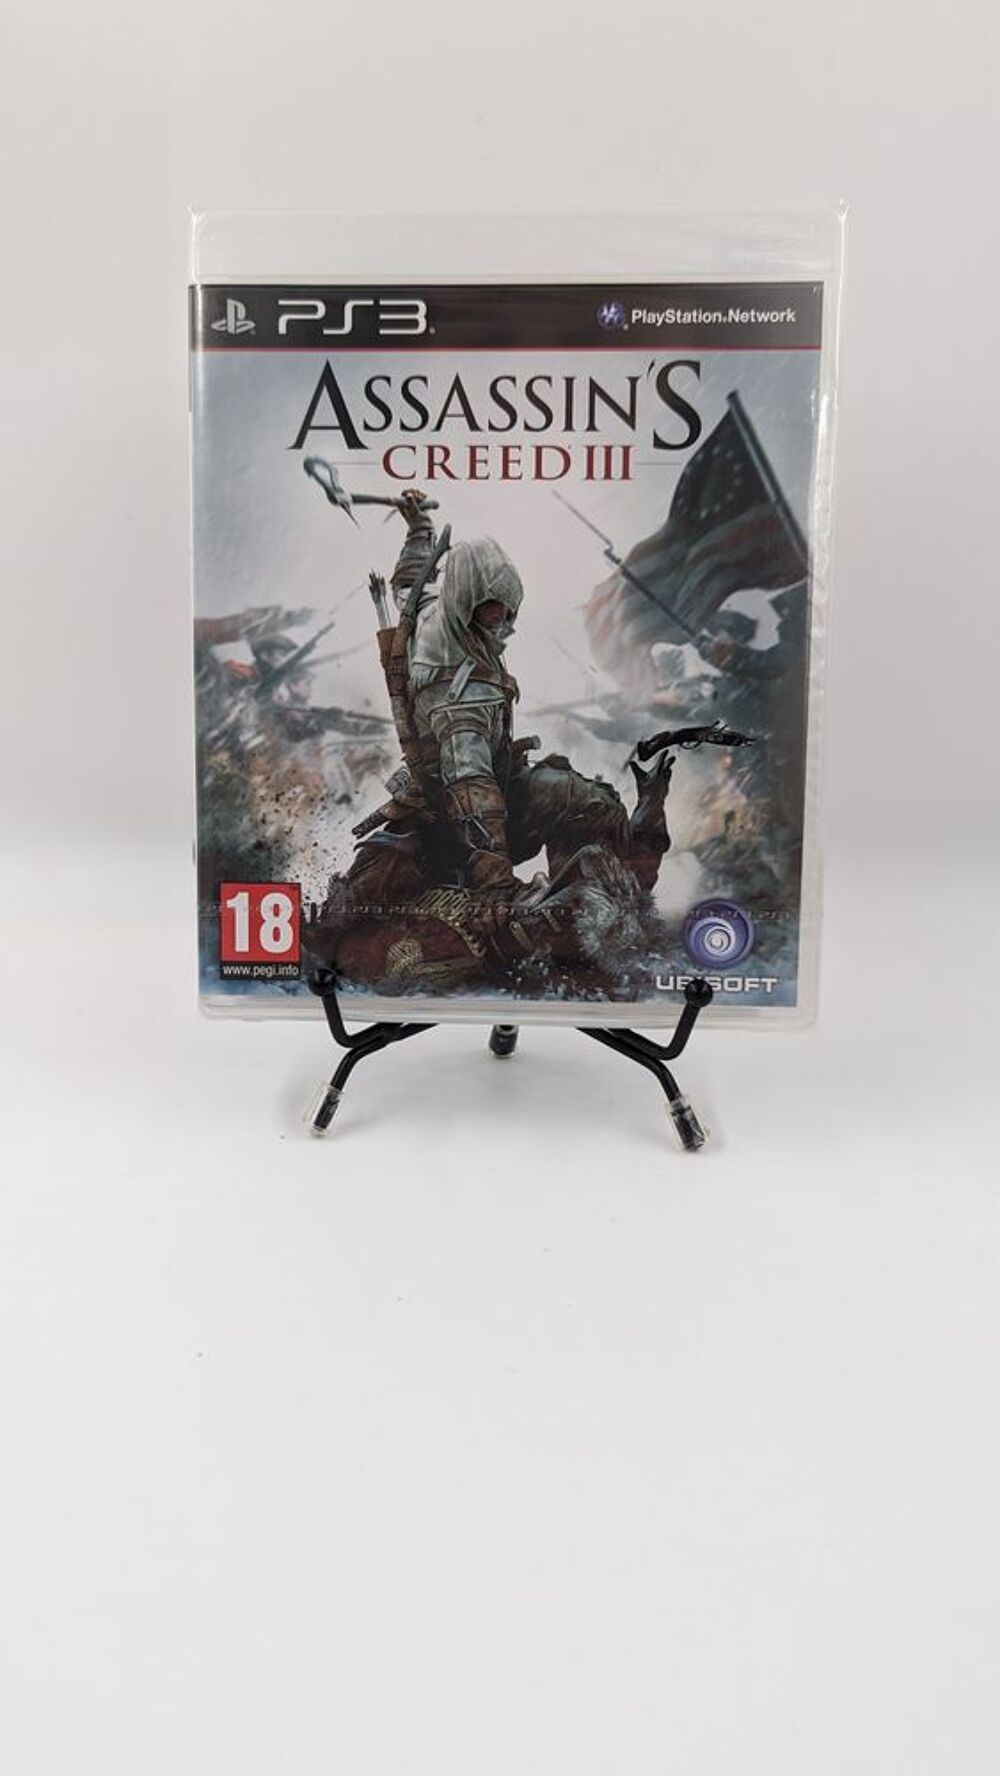 Jeu PS3 Playstation 3 Assassin's Creed III (3) neuf blister Consoles et jeux vidos